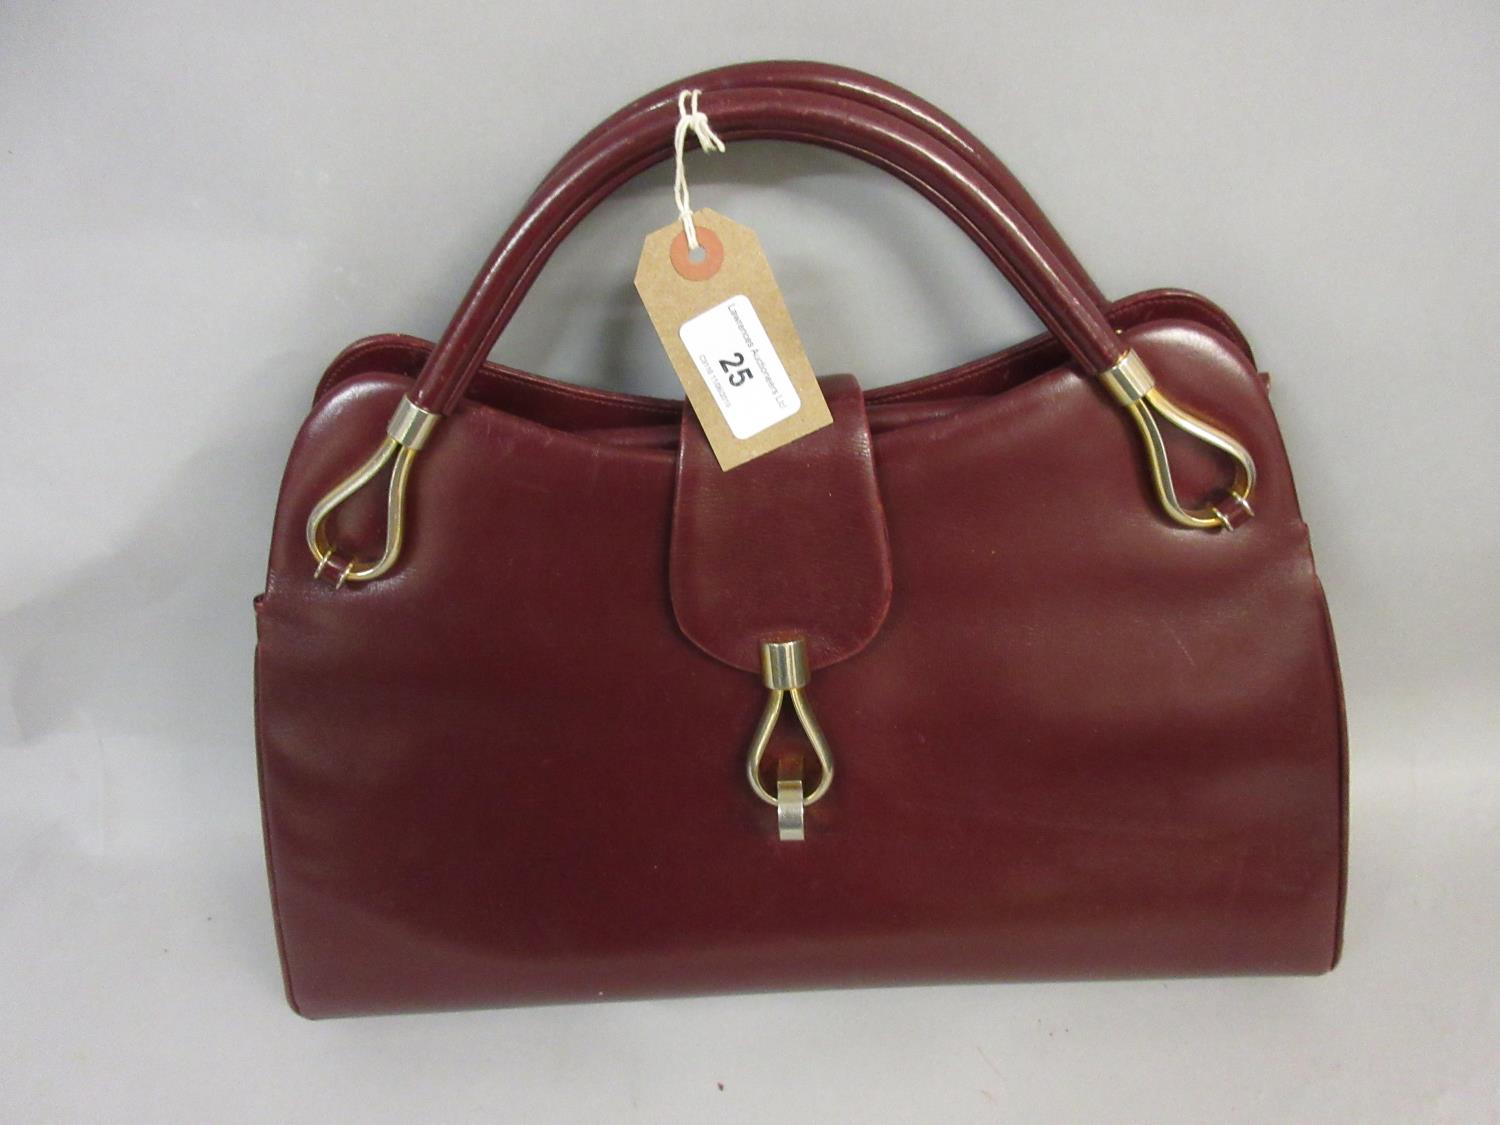 Ladies burgundy leather handbag by Dunhill